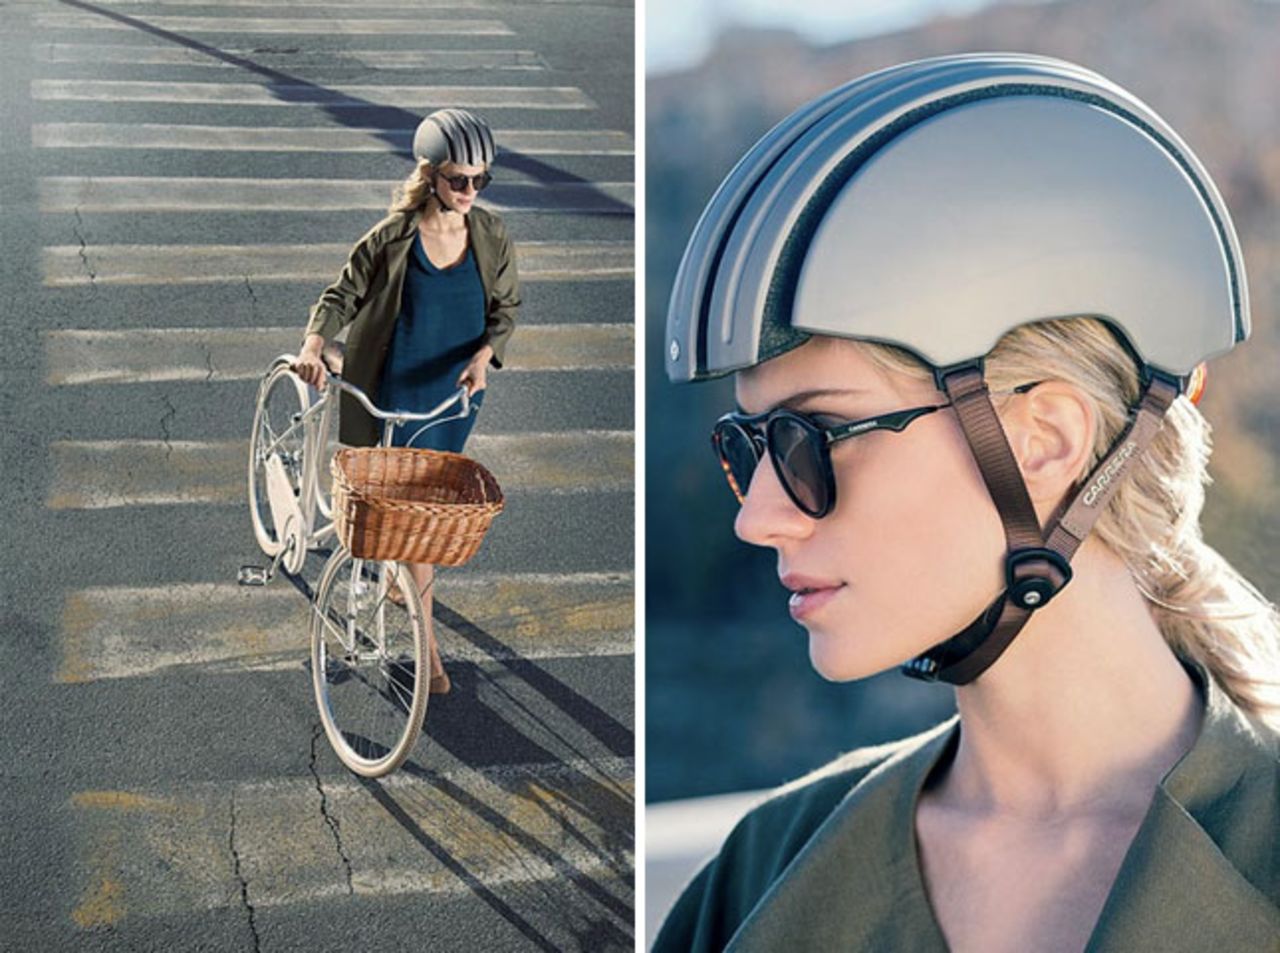 <a href="http://carreraworld.com/gb/" target="_blank" target="_blank">Carrera</a>'s new foldable helmet is a 'revolution in city bike protection'. It's flexible frame means you can stash it away in a bag with no compromise on safety.